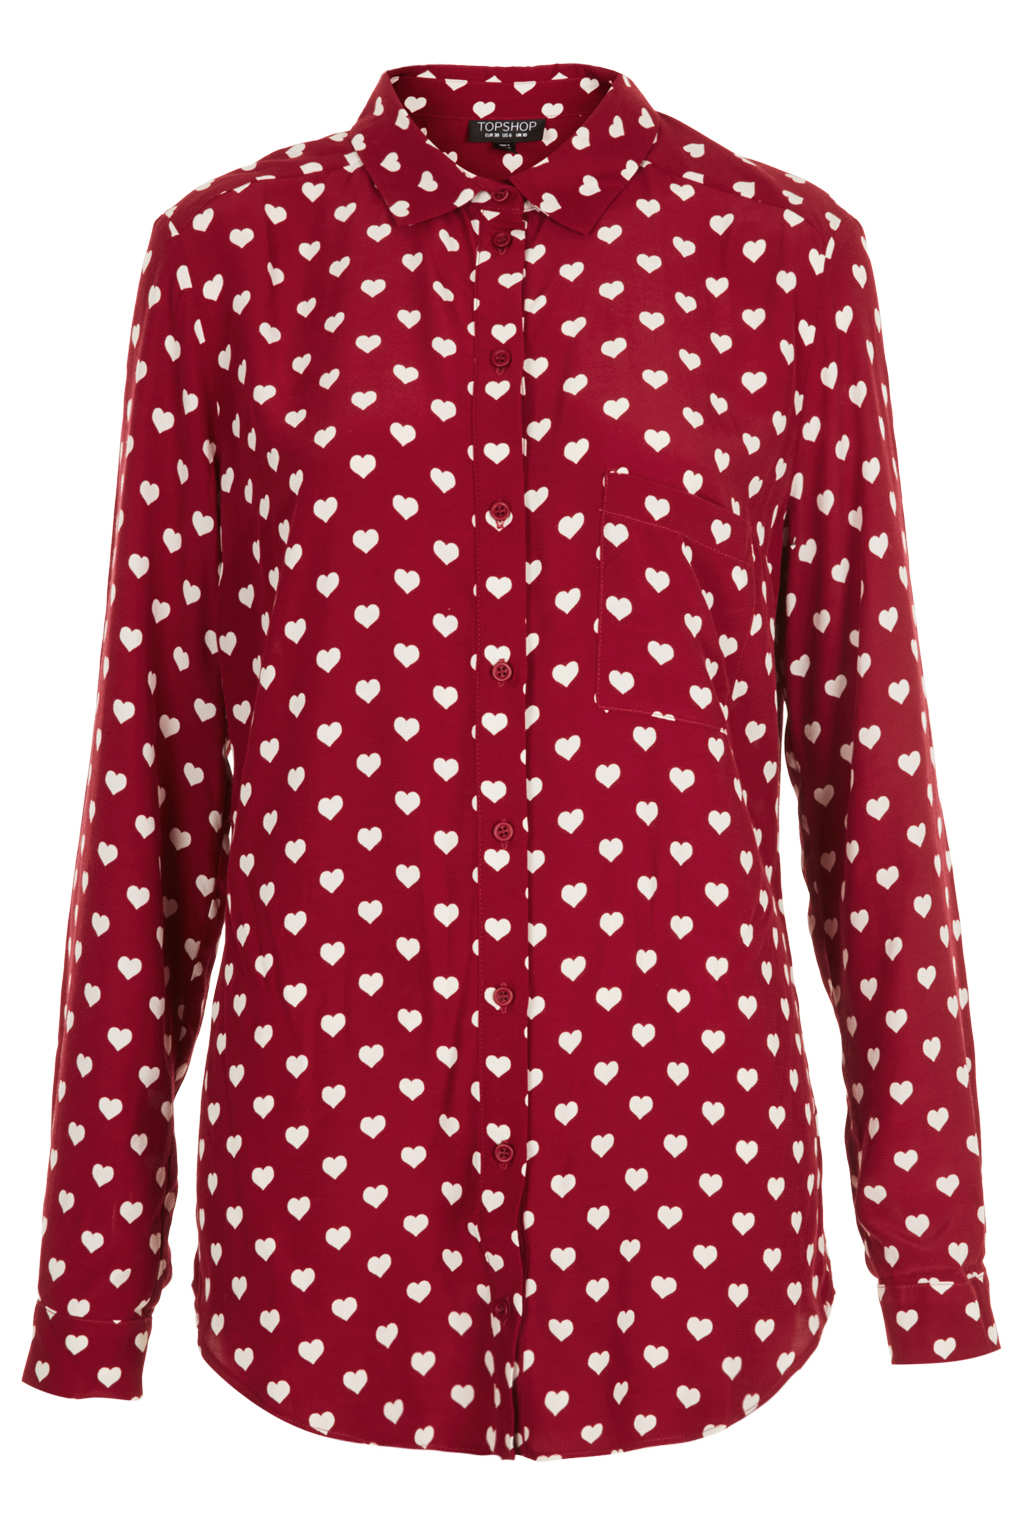 Topshop Heart Print Shirt in Red | Lyst